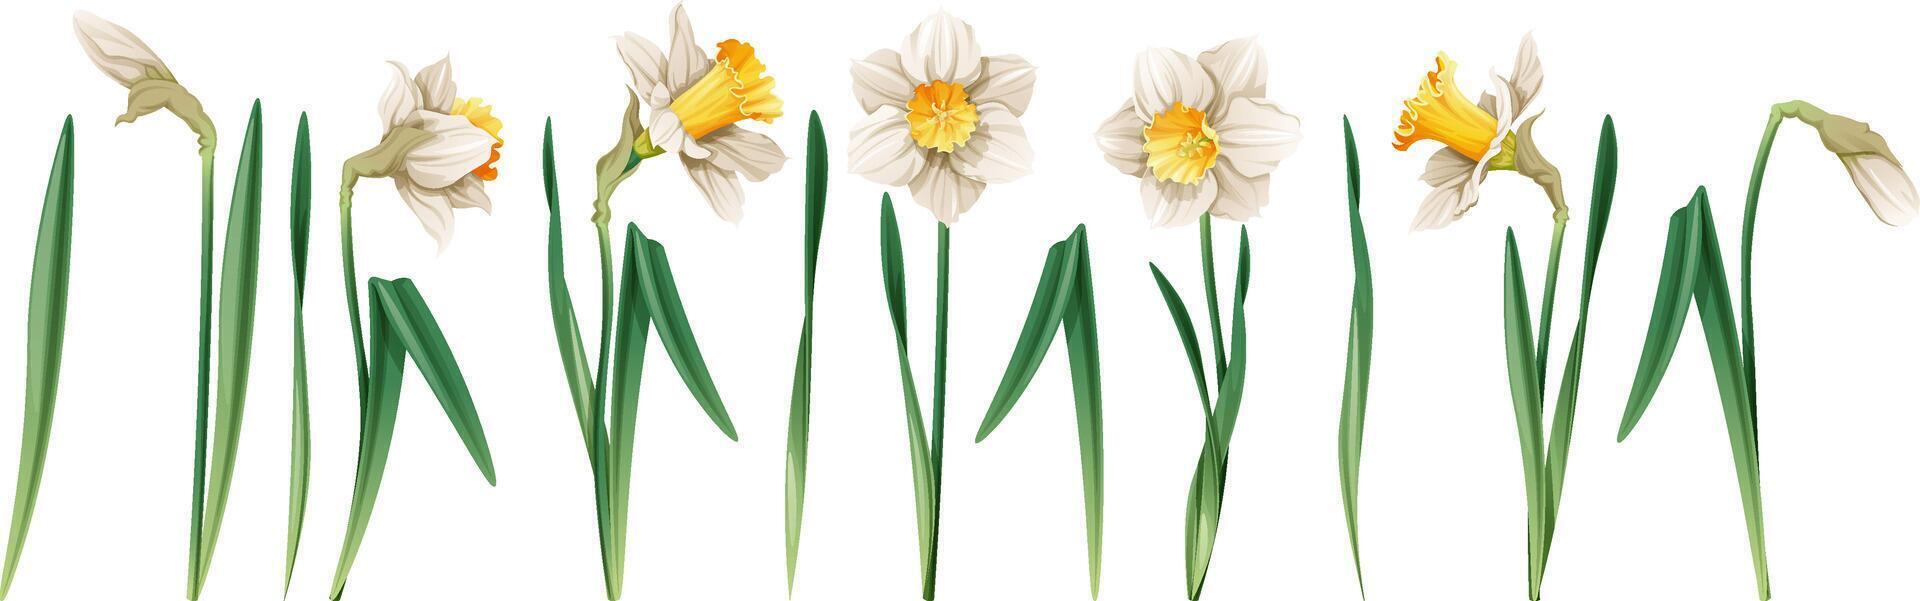 Set of daffodil on an isolated background in cartoon style. Spring white flower for Easter. Beautiful narcissus flower. Vector floral illustration.